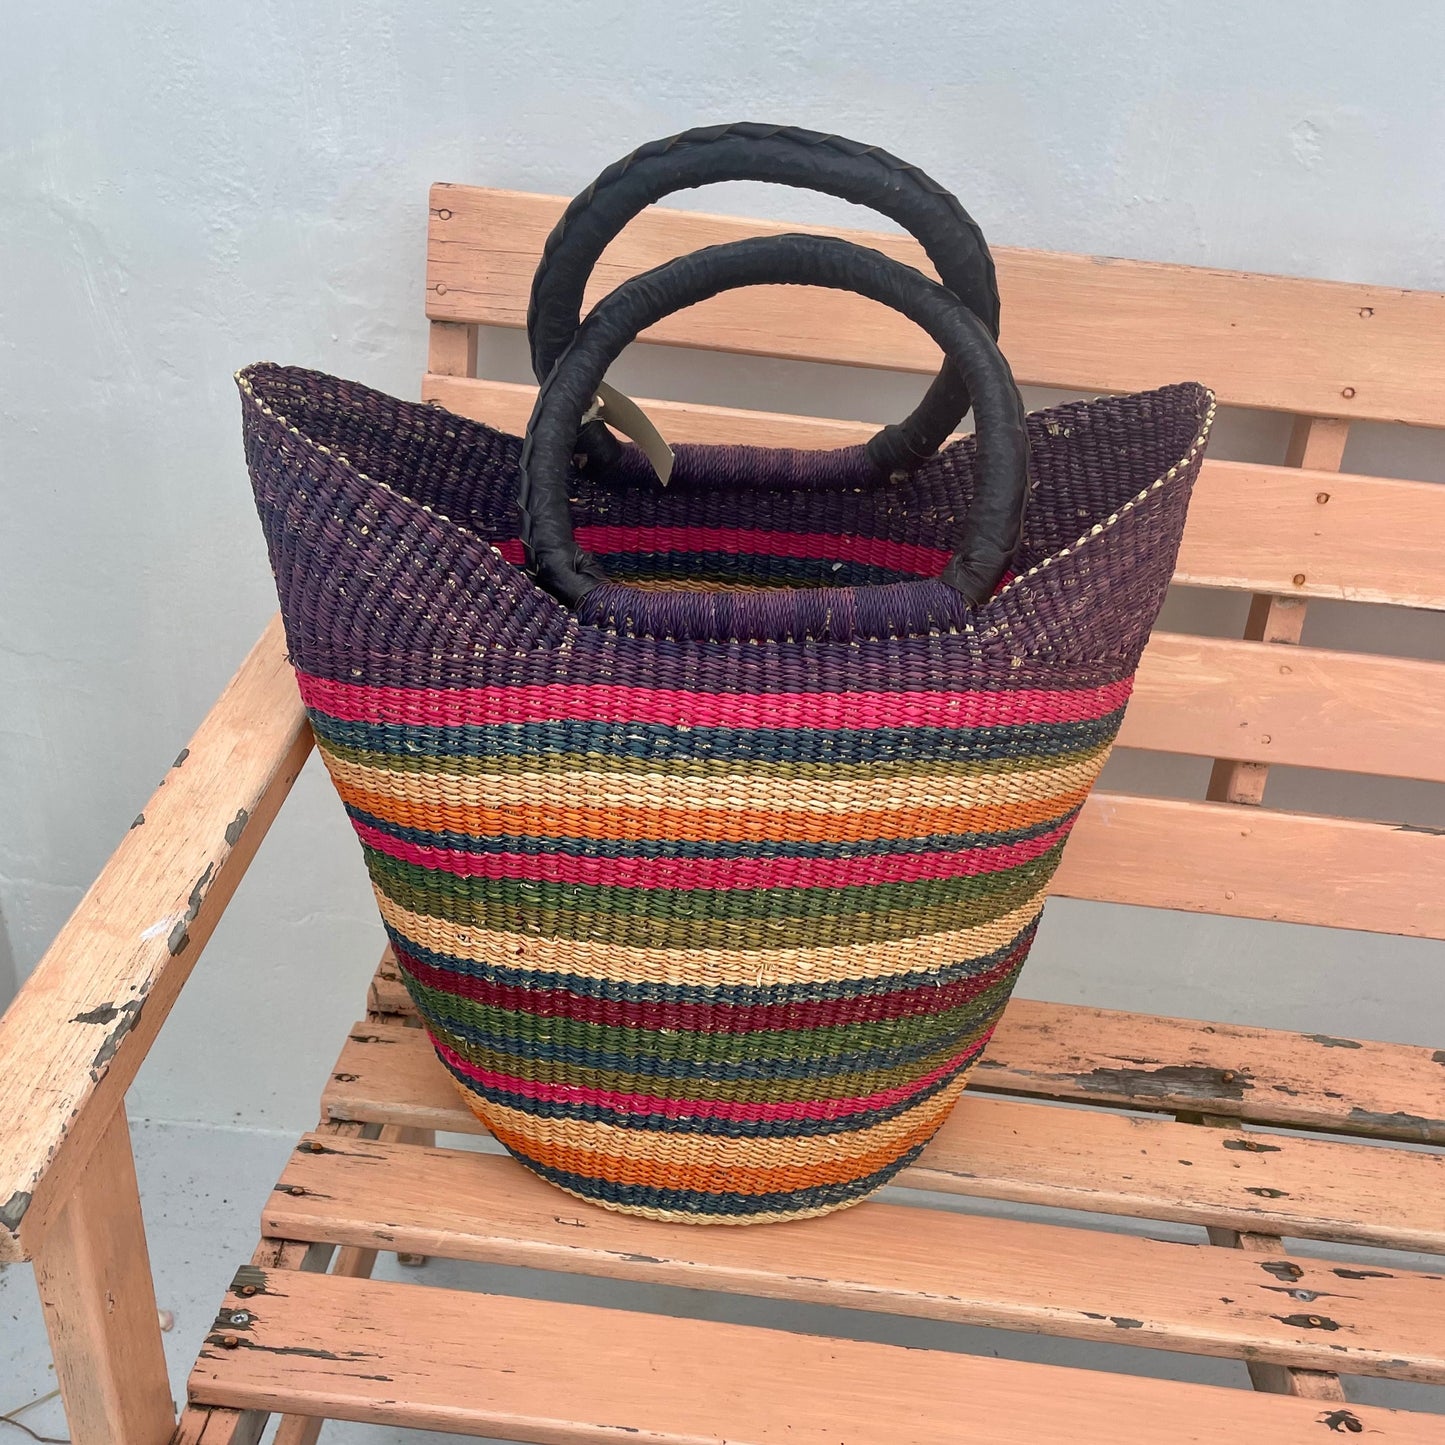 Bag braided with elephant grass multi colored in stripes. Leather handle. Fair Trade from Ghana